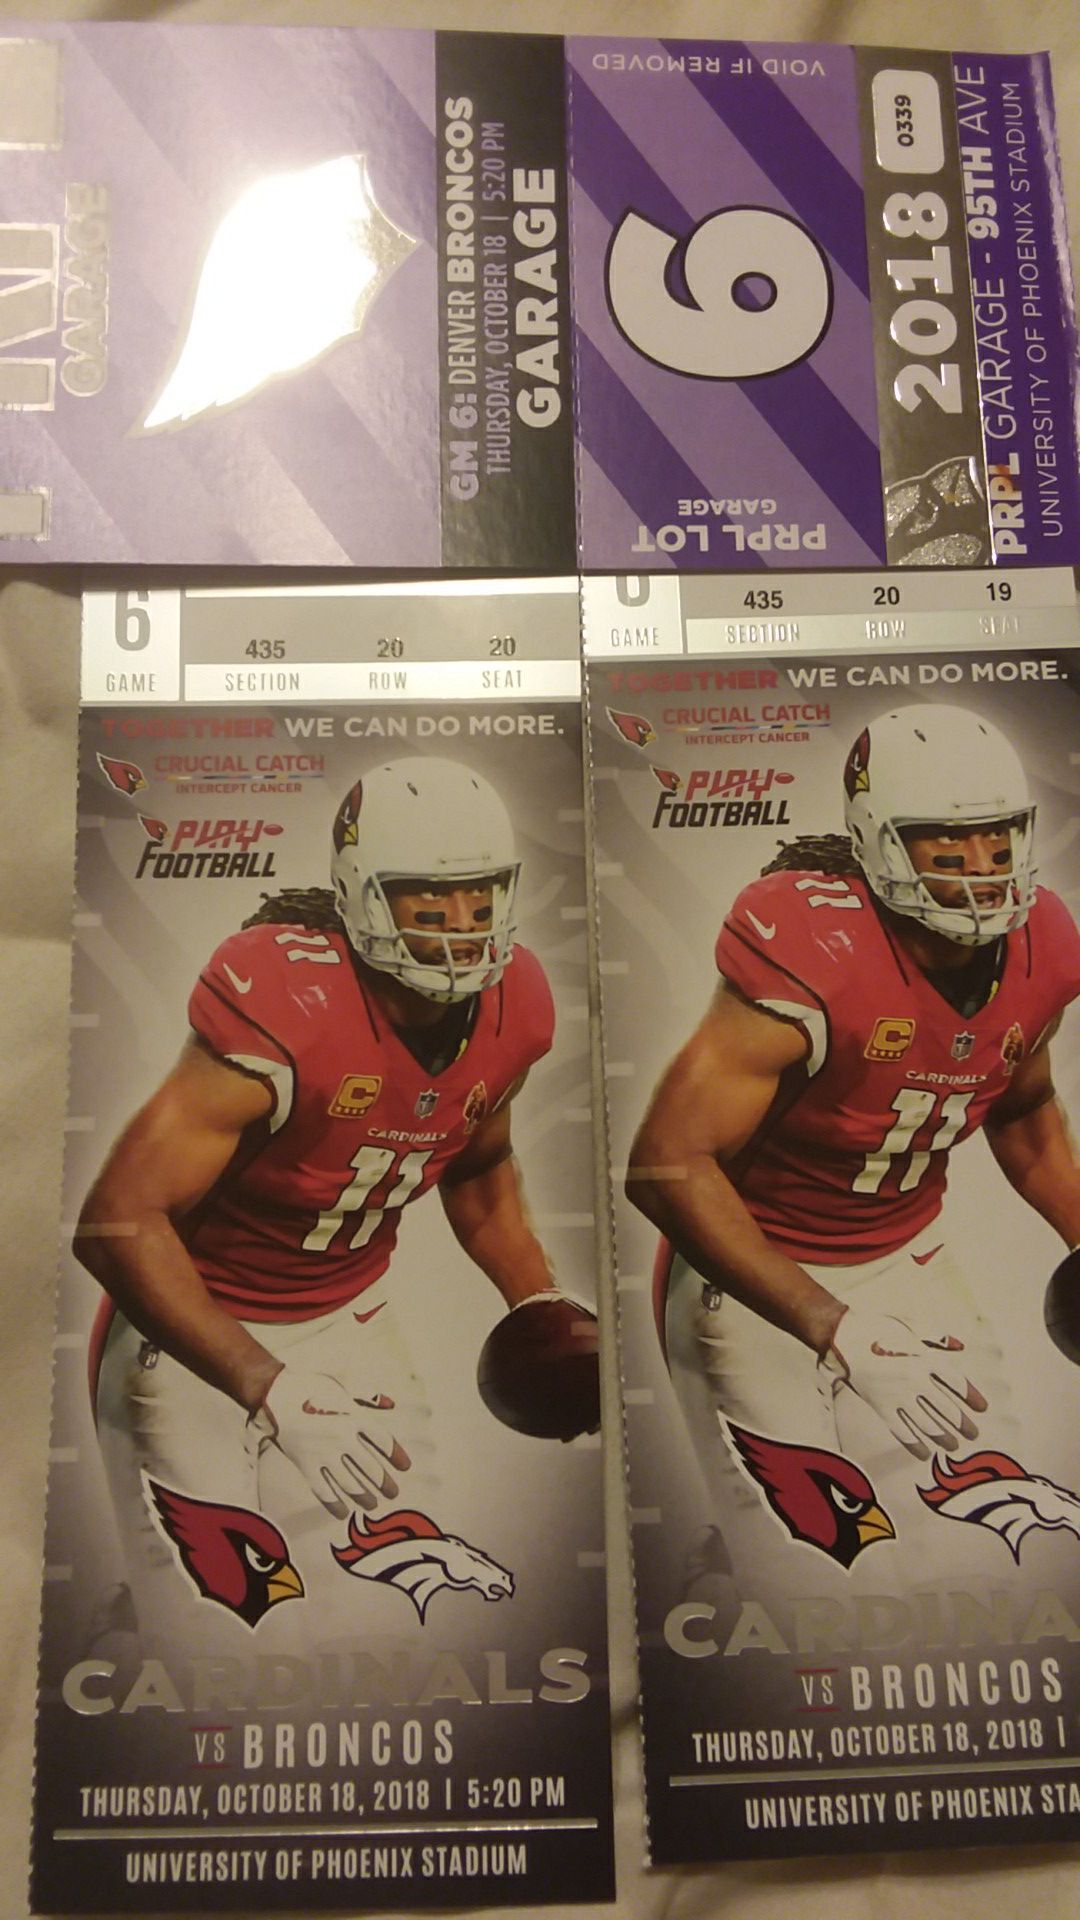 Cardinals vs Broncos $130 for 2 tickets and parking pass